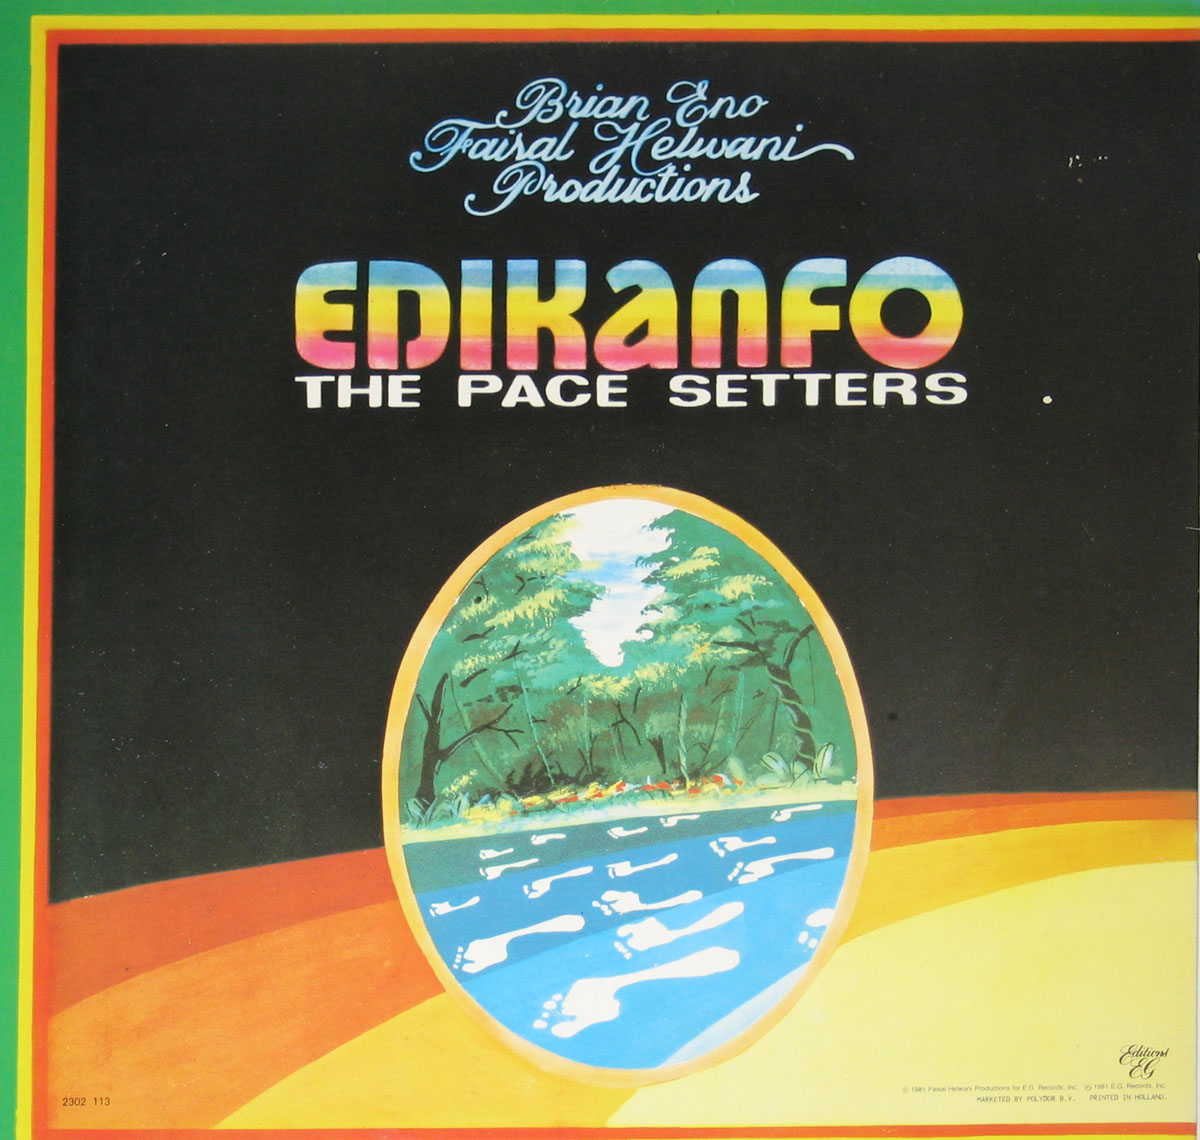 High Resolution Photo EDIKANFO AFRICAN SUPER BAND THE PACE SETTERS BRIAN ENO 